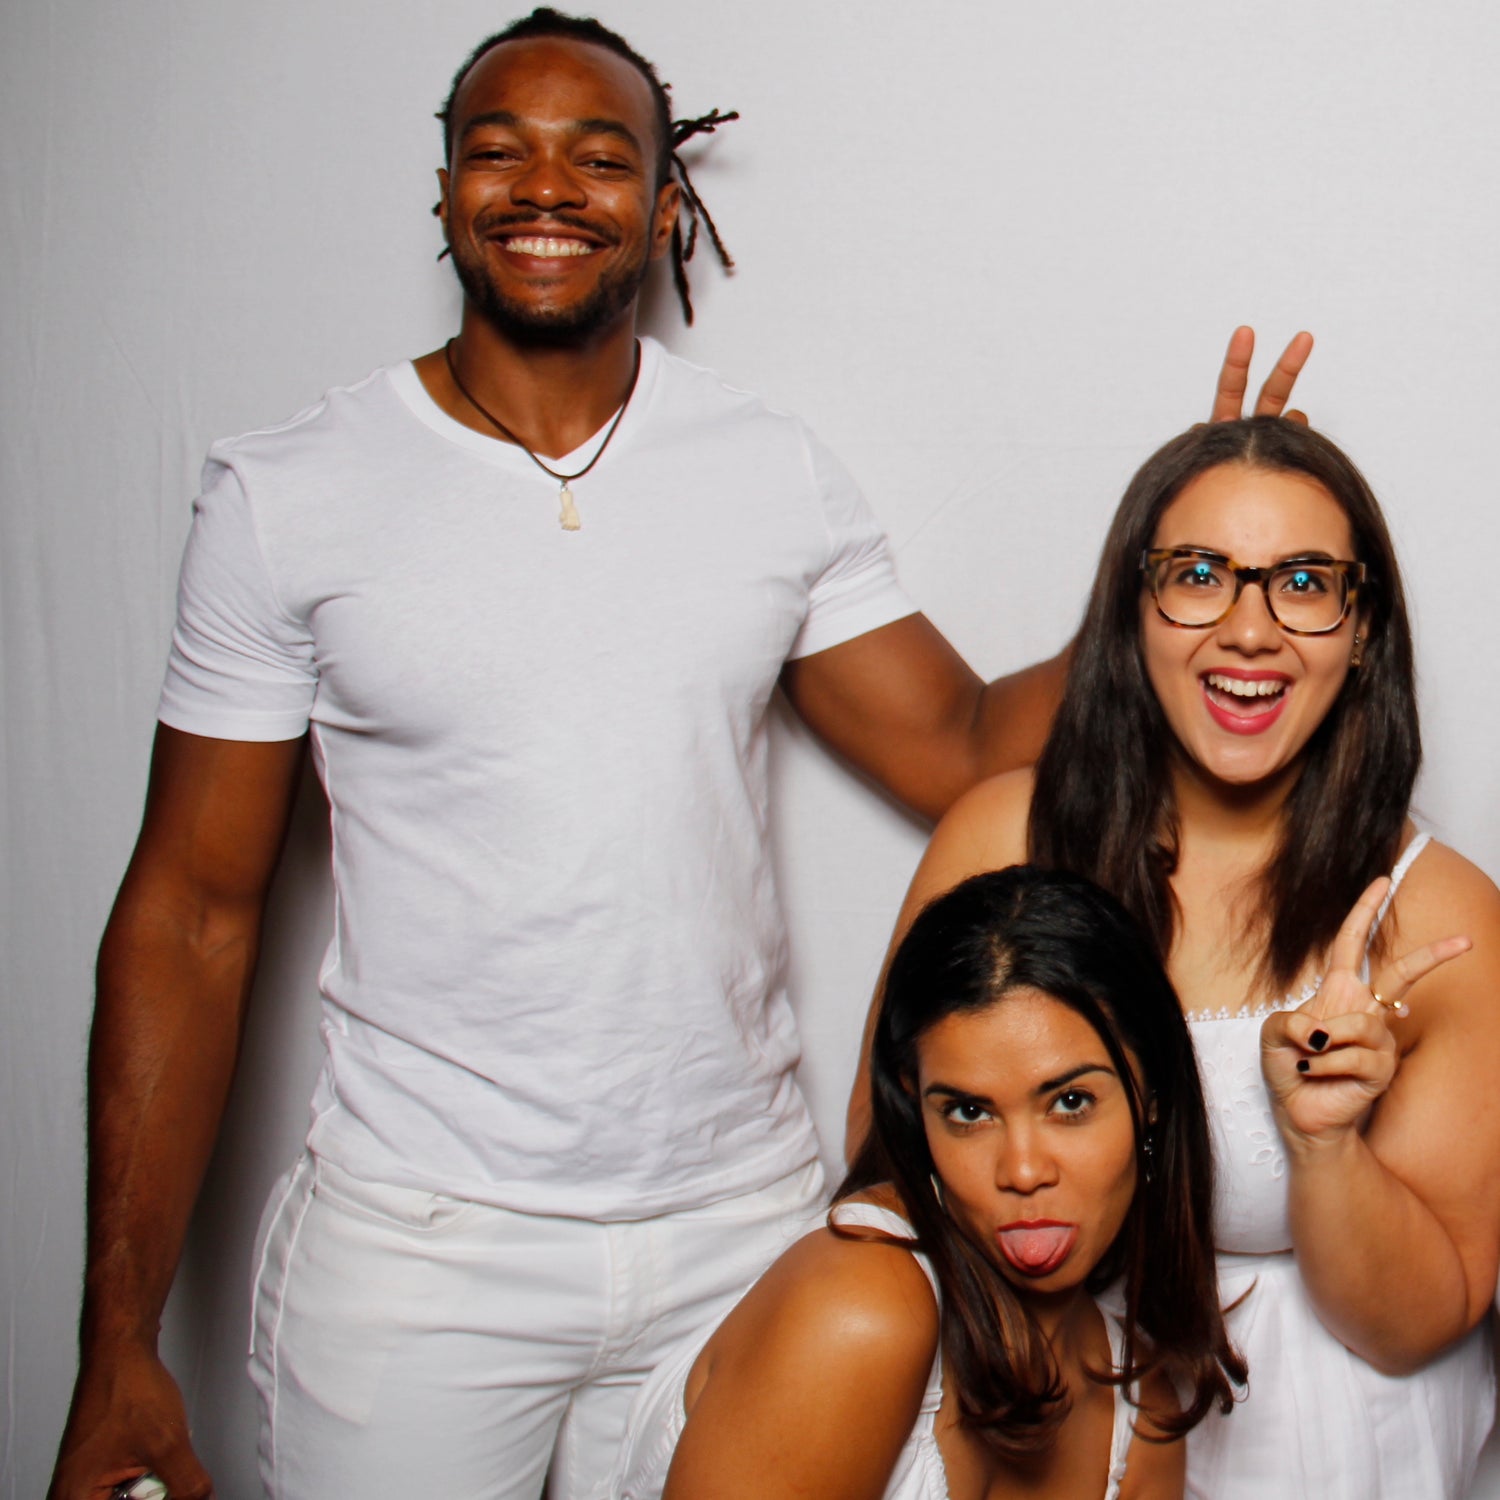 All White Party Photo Booth in Miami Florida